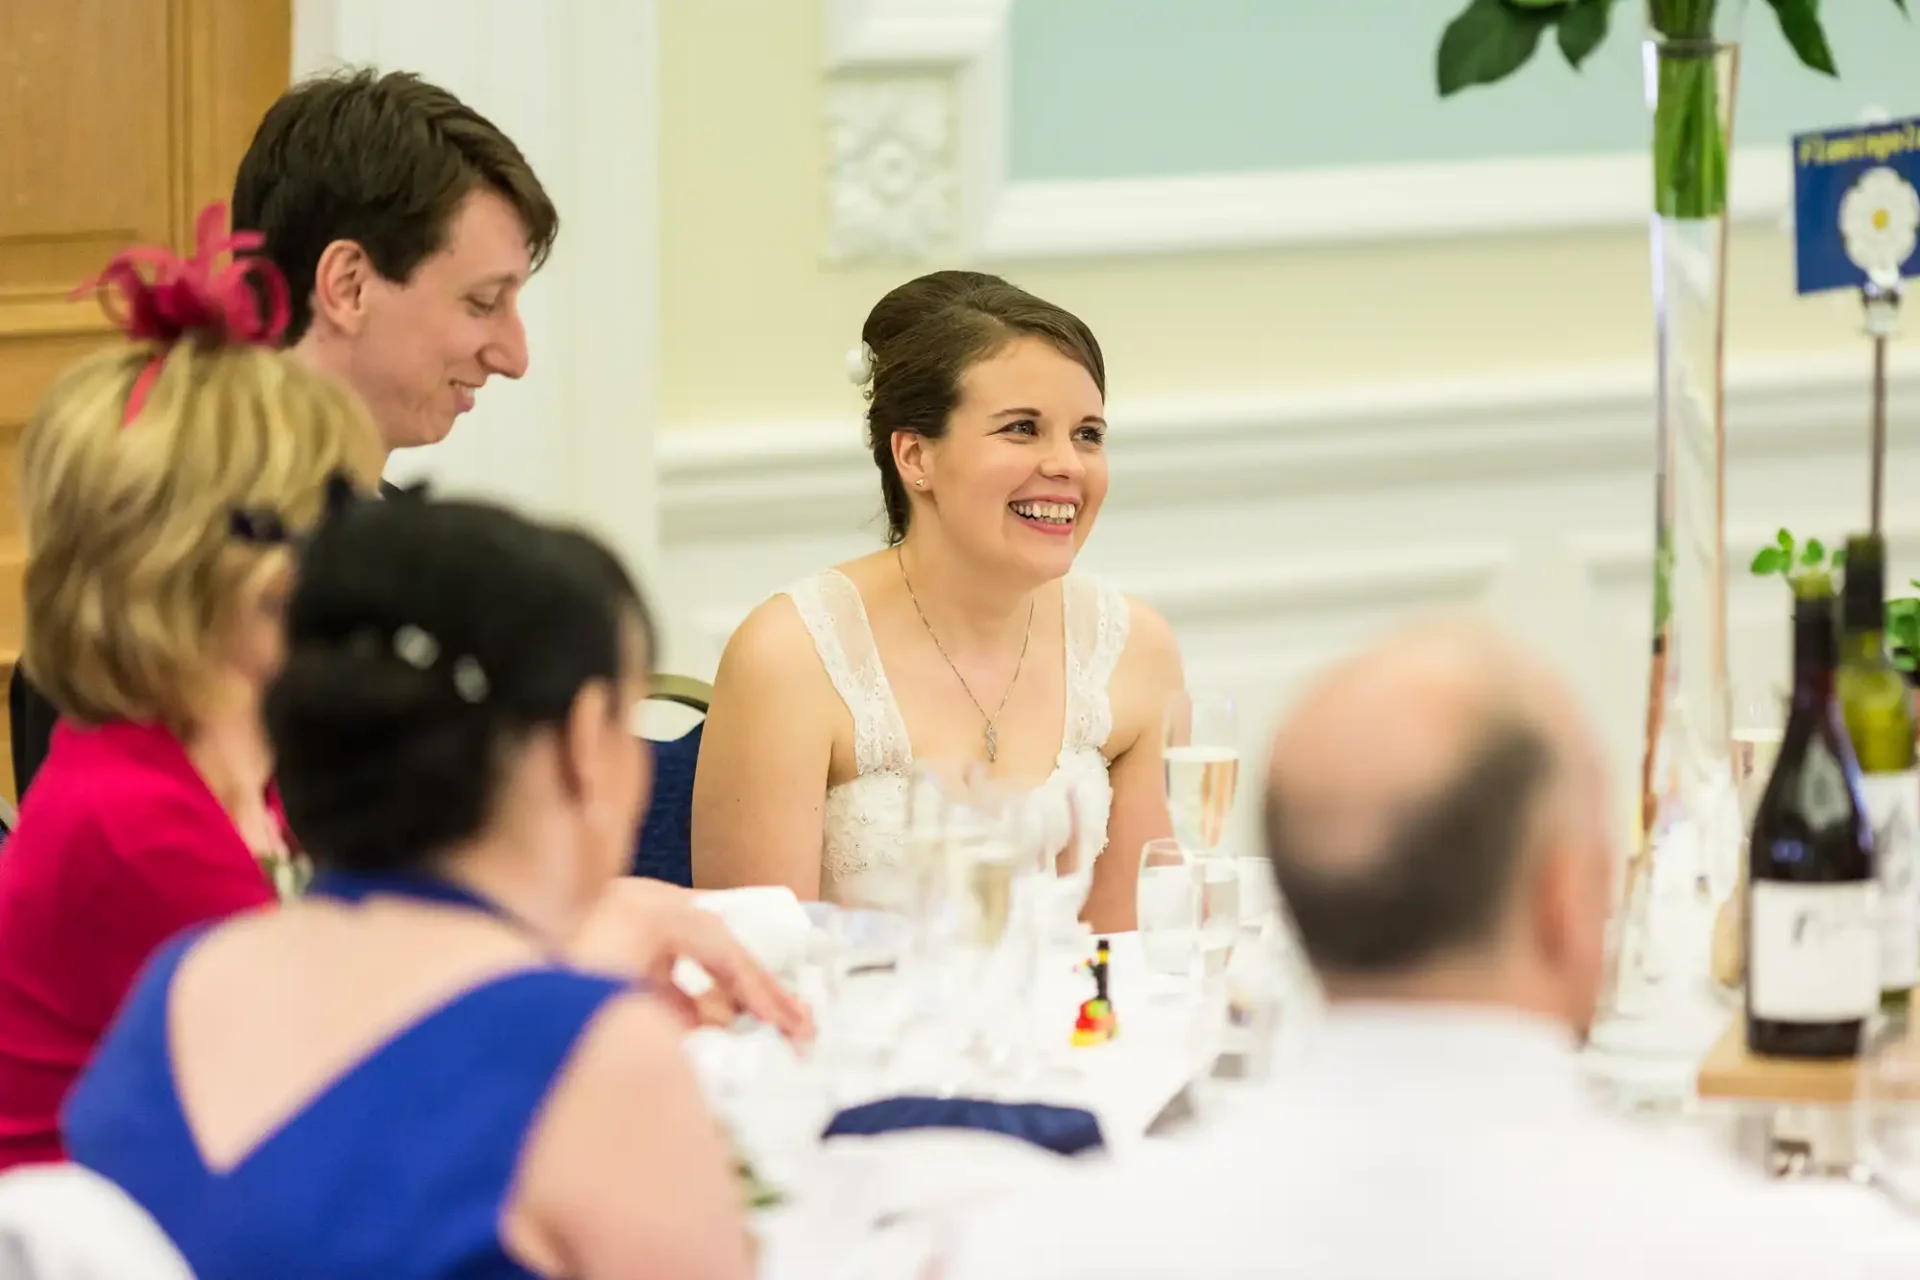 A bride in a white dress smiling at a wedding reception table surrounded by guests.